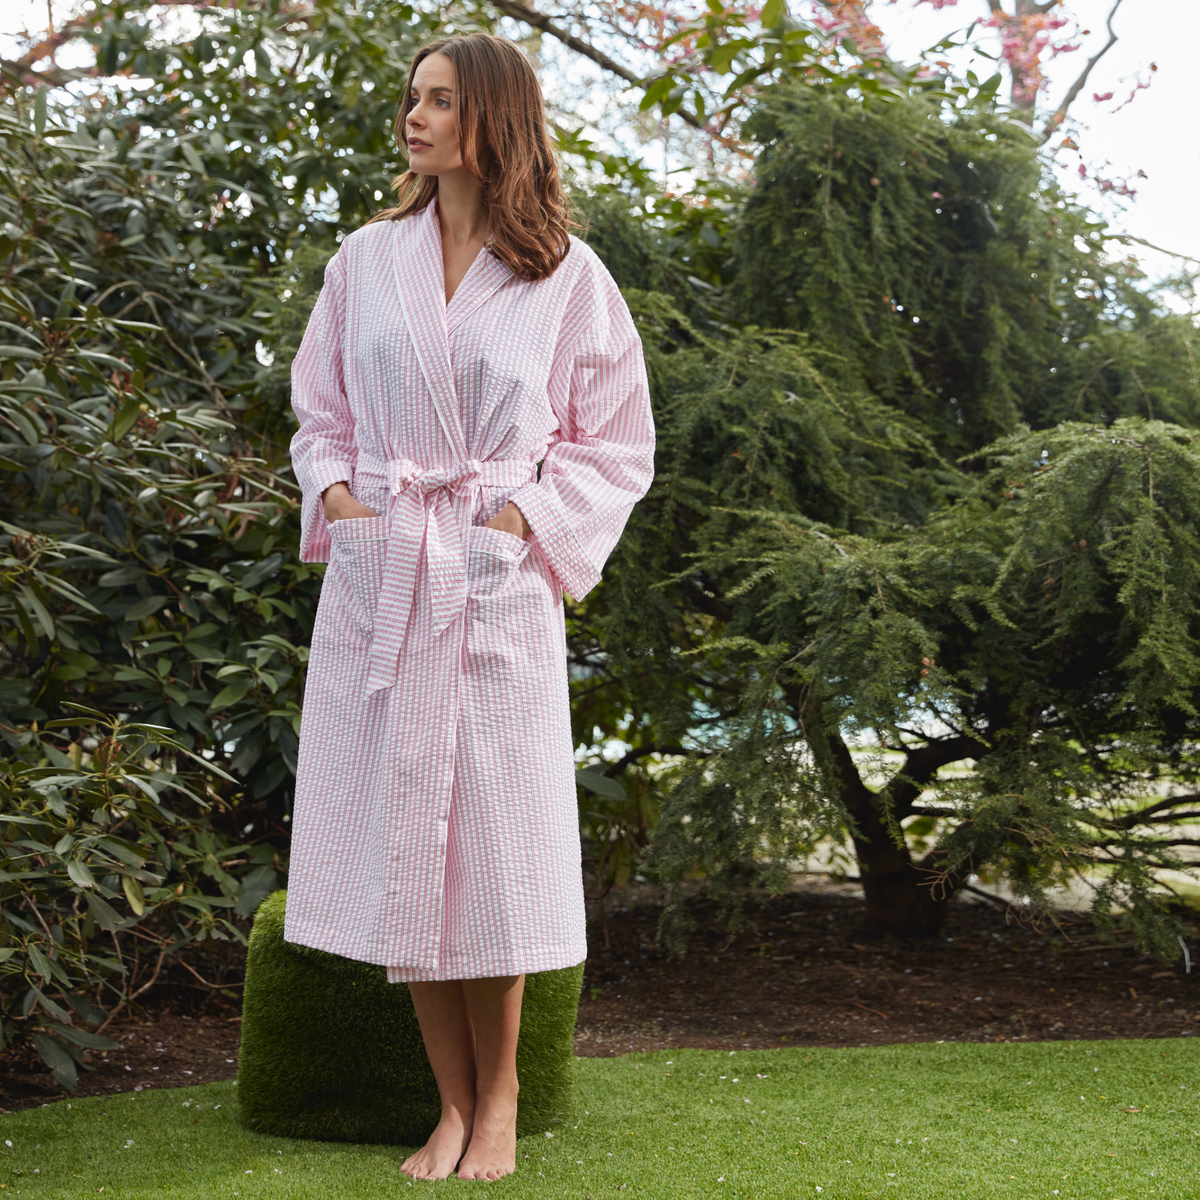 A 5” 11 inches Tall Female Model Wearing a Size Small Matouk Matteo Robe in Peony Color